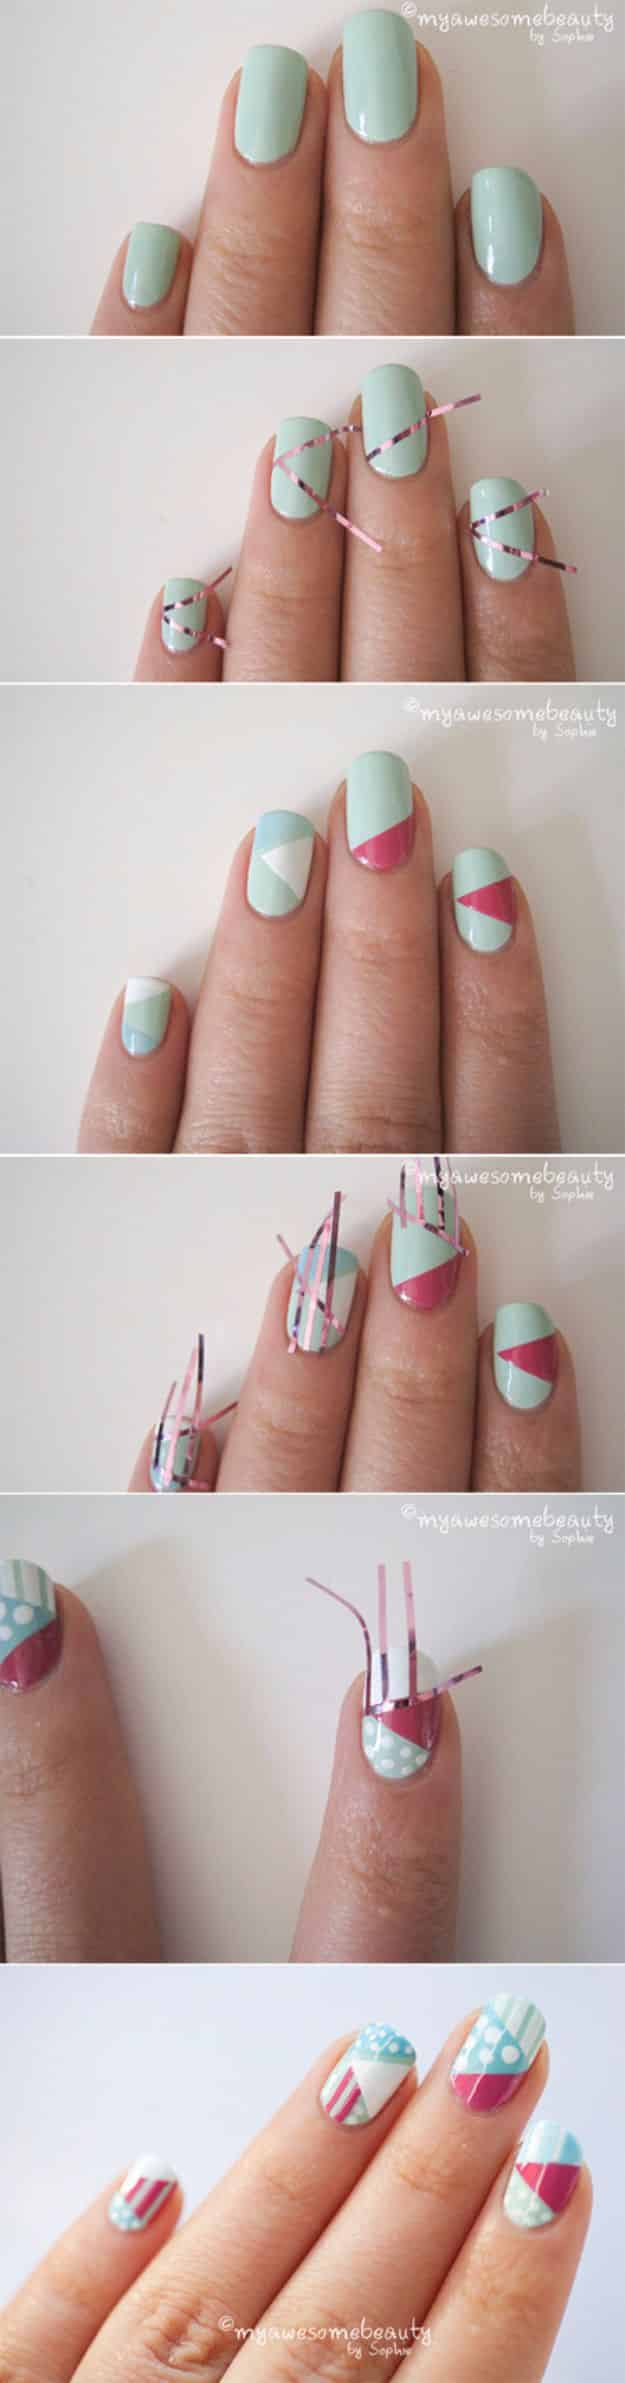 Easy Ways to Paint Nails - Geometric Nails - Quick Tips and Tricks for Manicures at Home - Nail Designs and Art Ideas for Simple DIY Pedicures and Manicure at Home - Hacks and Tutorials with Cool Step by Step Instructions and Tutorials - DIY Projects and Crafts by DIY JOY 